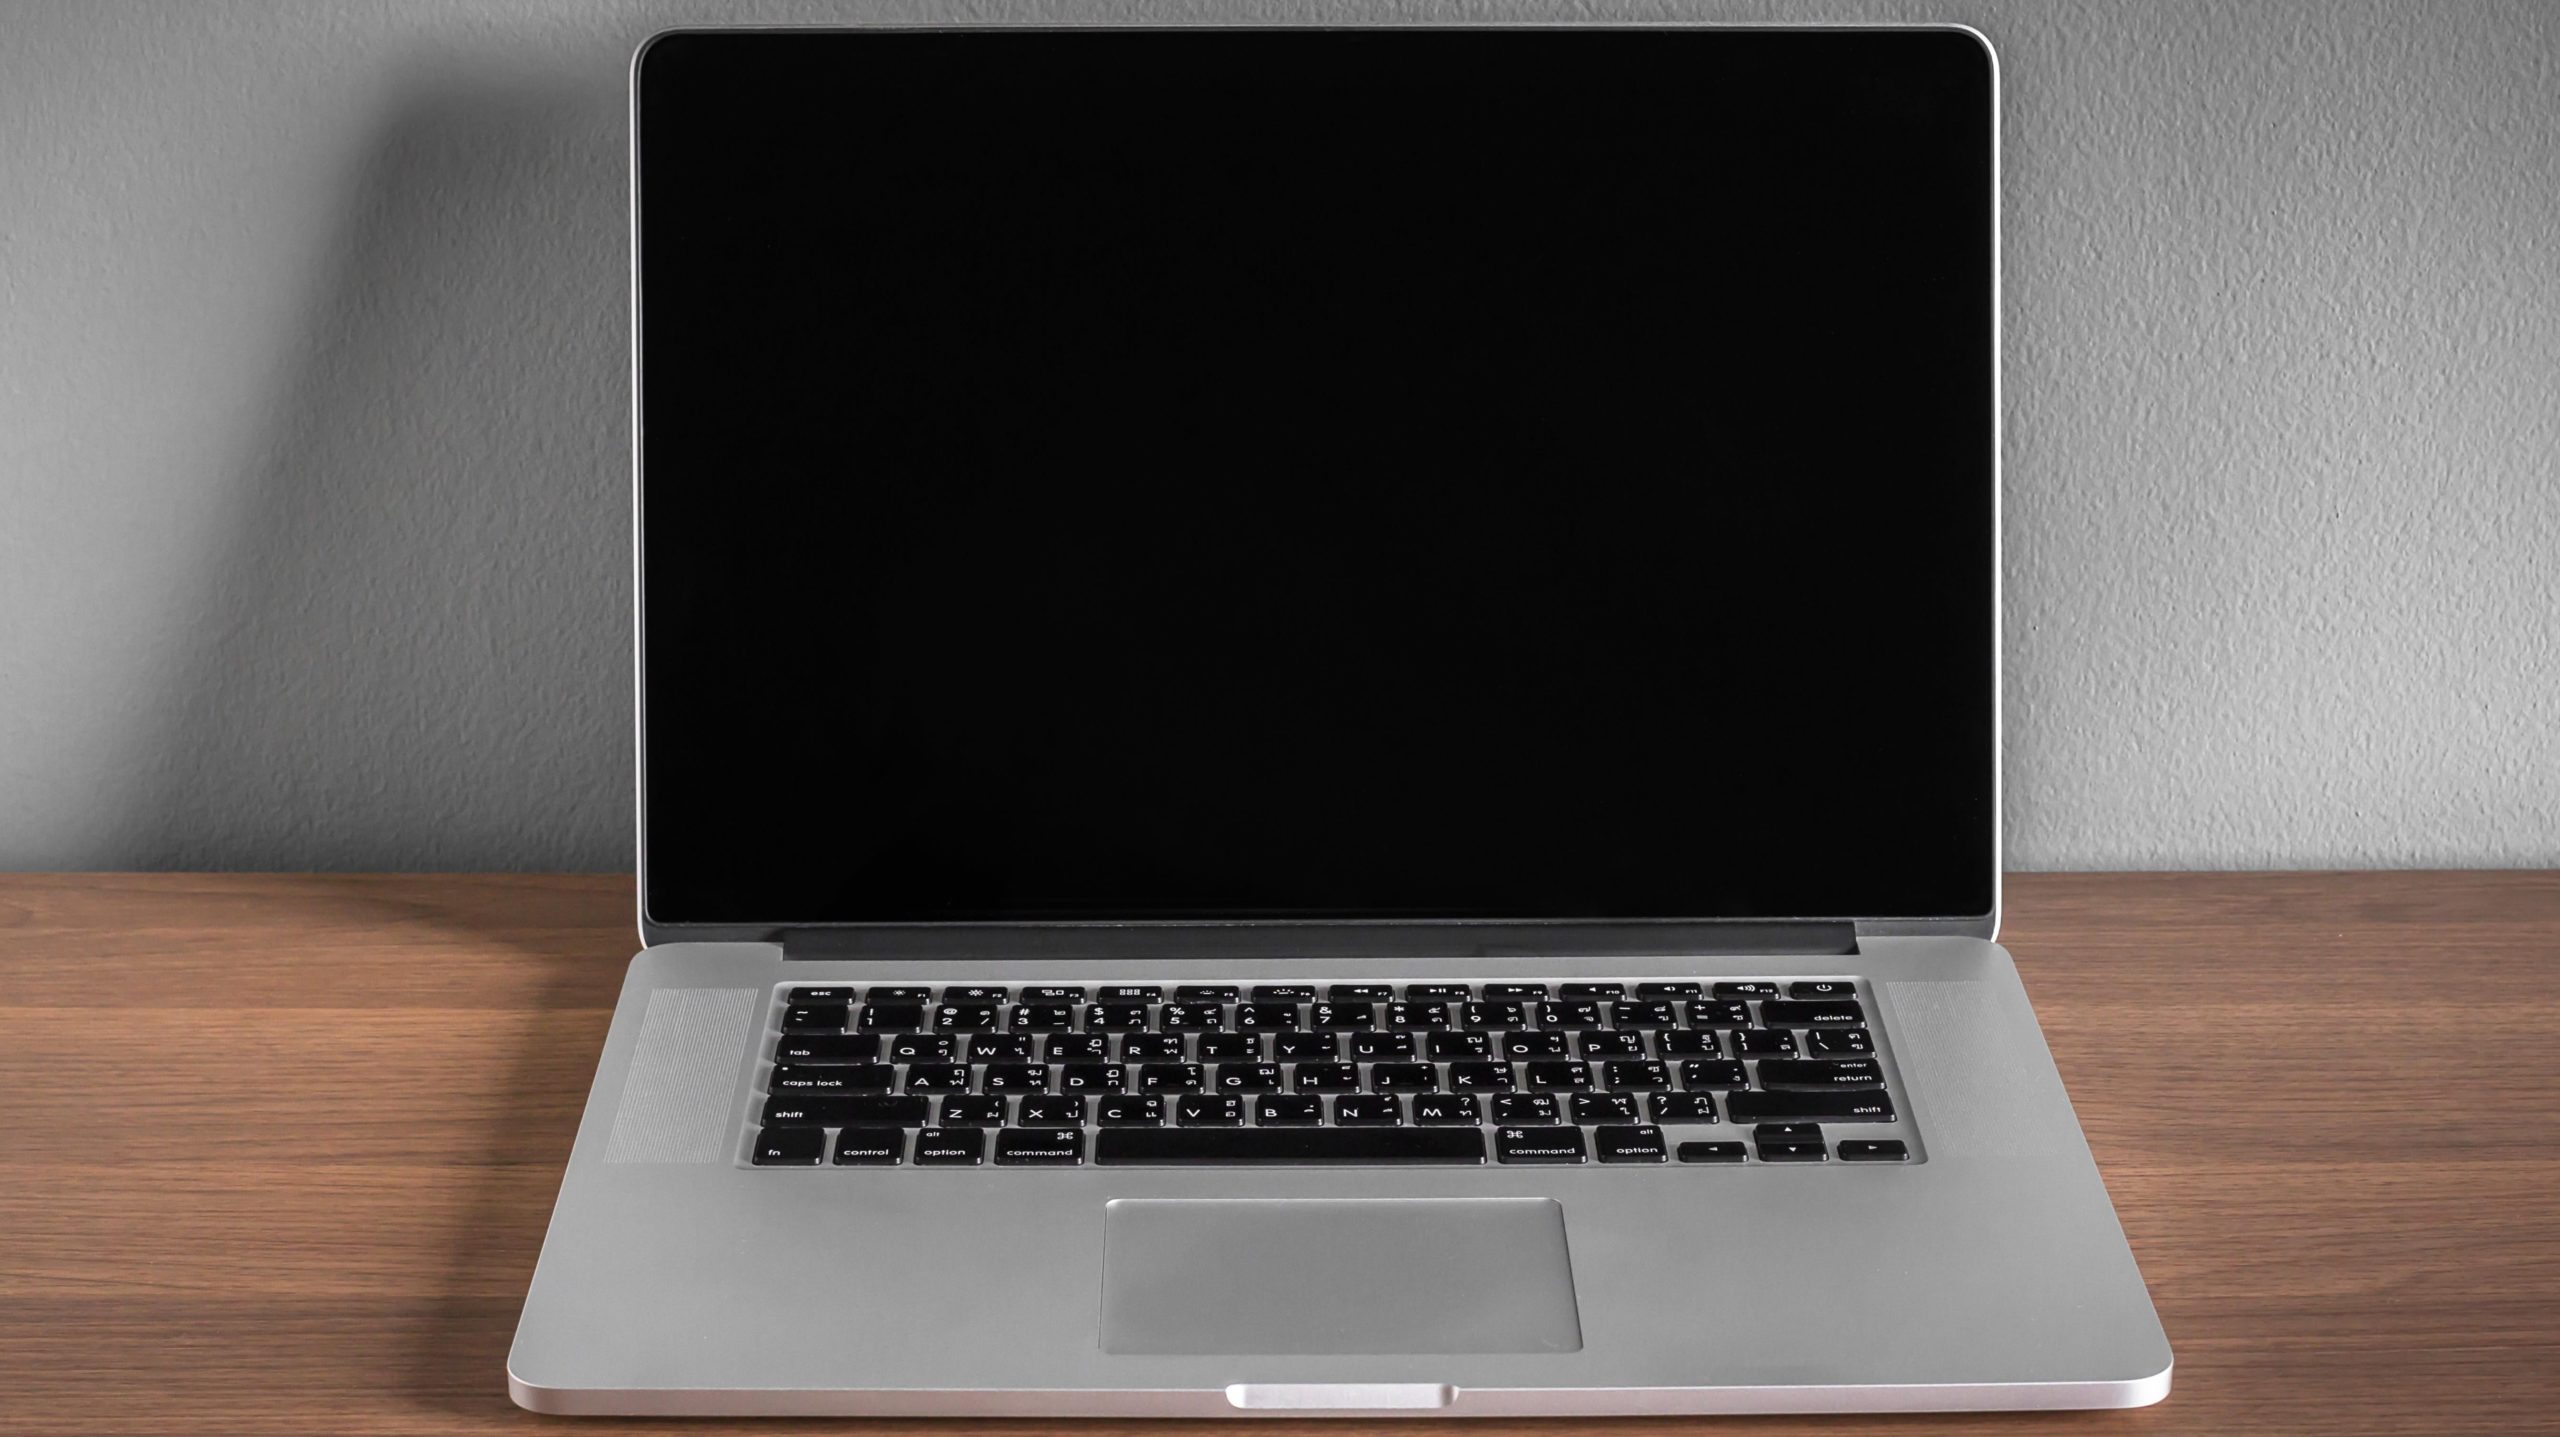 Install This Update to Keep Your MacBook Battery From Dying Overnight